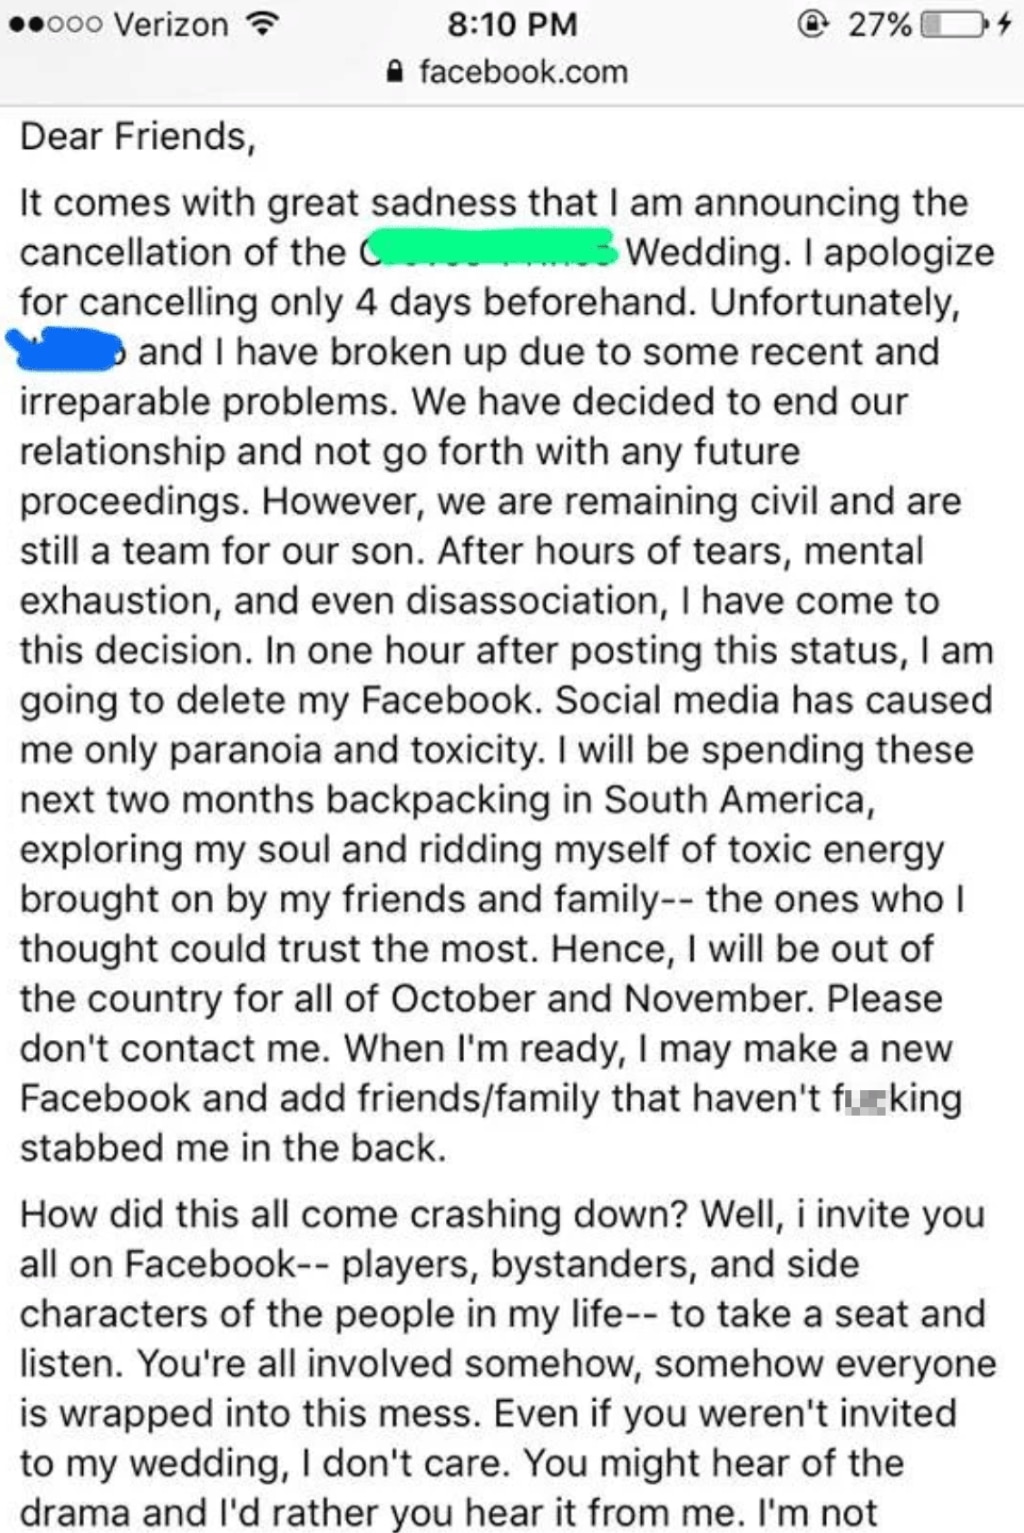 This post from an angry ‘bridezilla’ catapulted the group to international fame. Picture: that’s it - I’m wedding shaming 